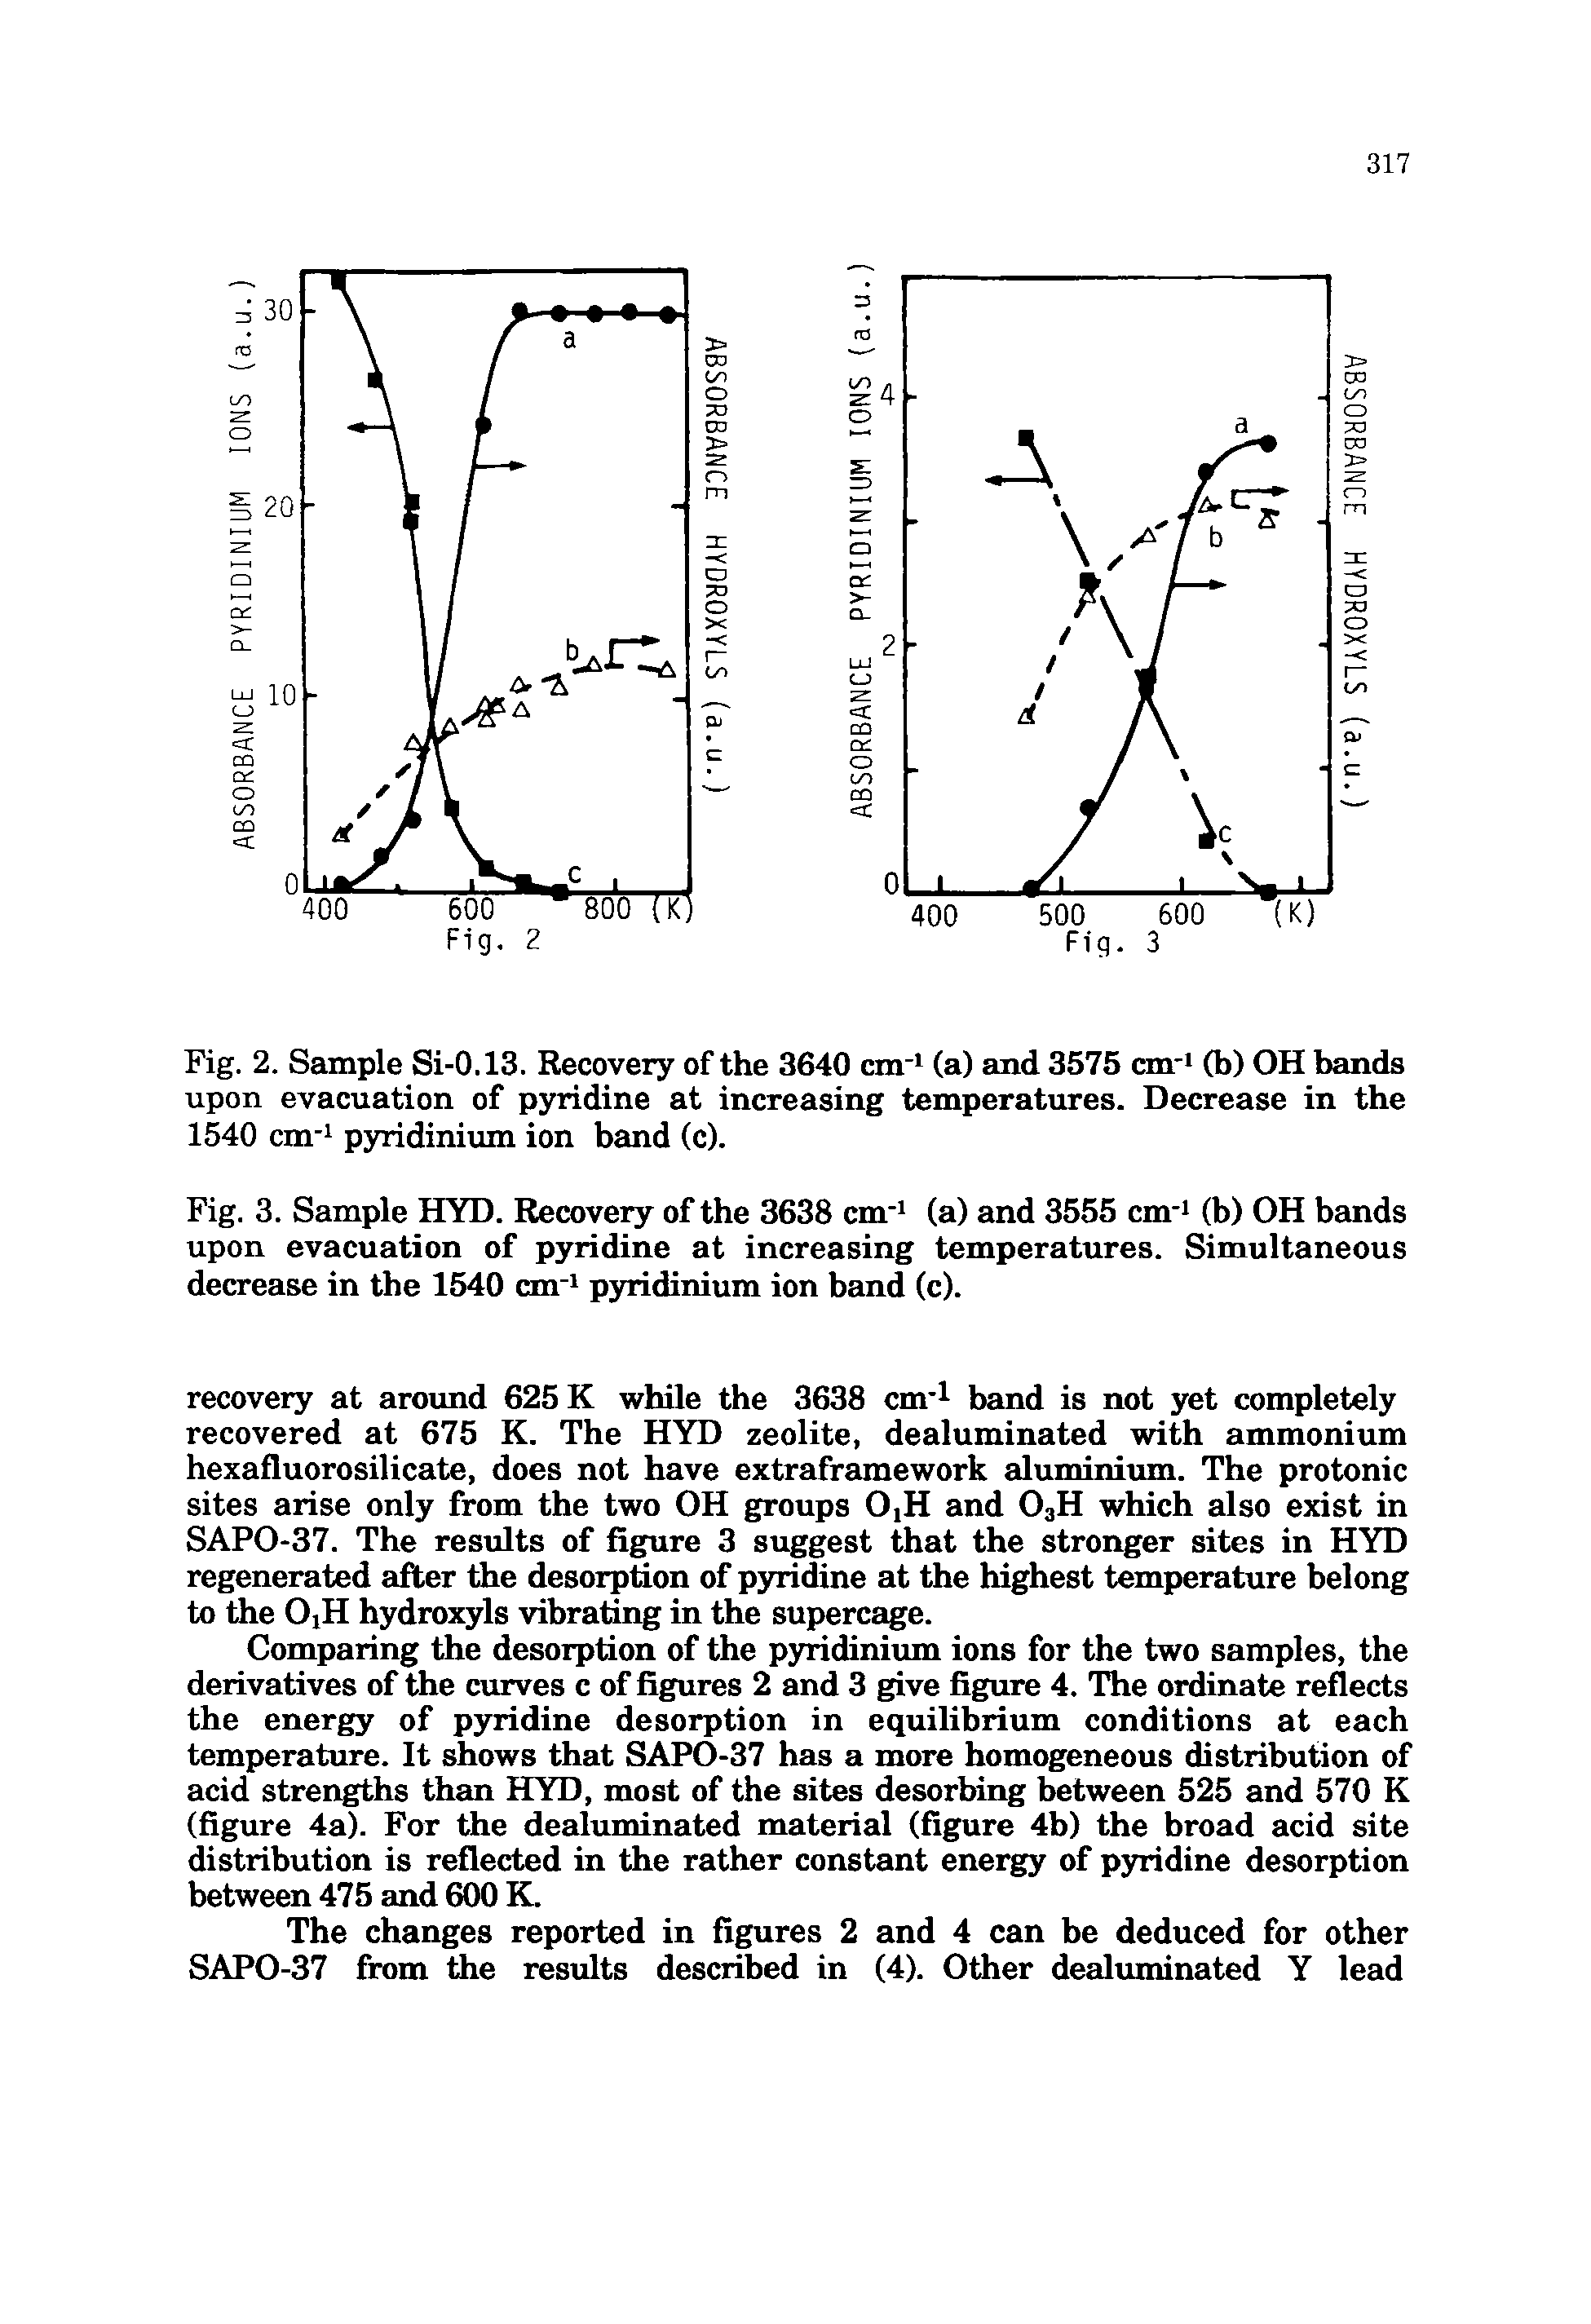 Fig. 2. Sample Si-0.13. Recovery of the 3640 cm- (a) and 3575 cm- (b) OH bands upon evacuation of pyridine at increasing temperatures. Decrease in the 1540 cm-i pyridinium ion band (c).